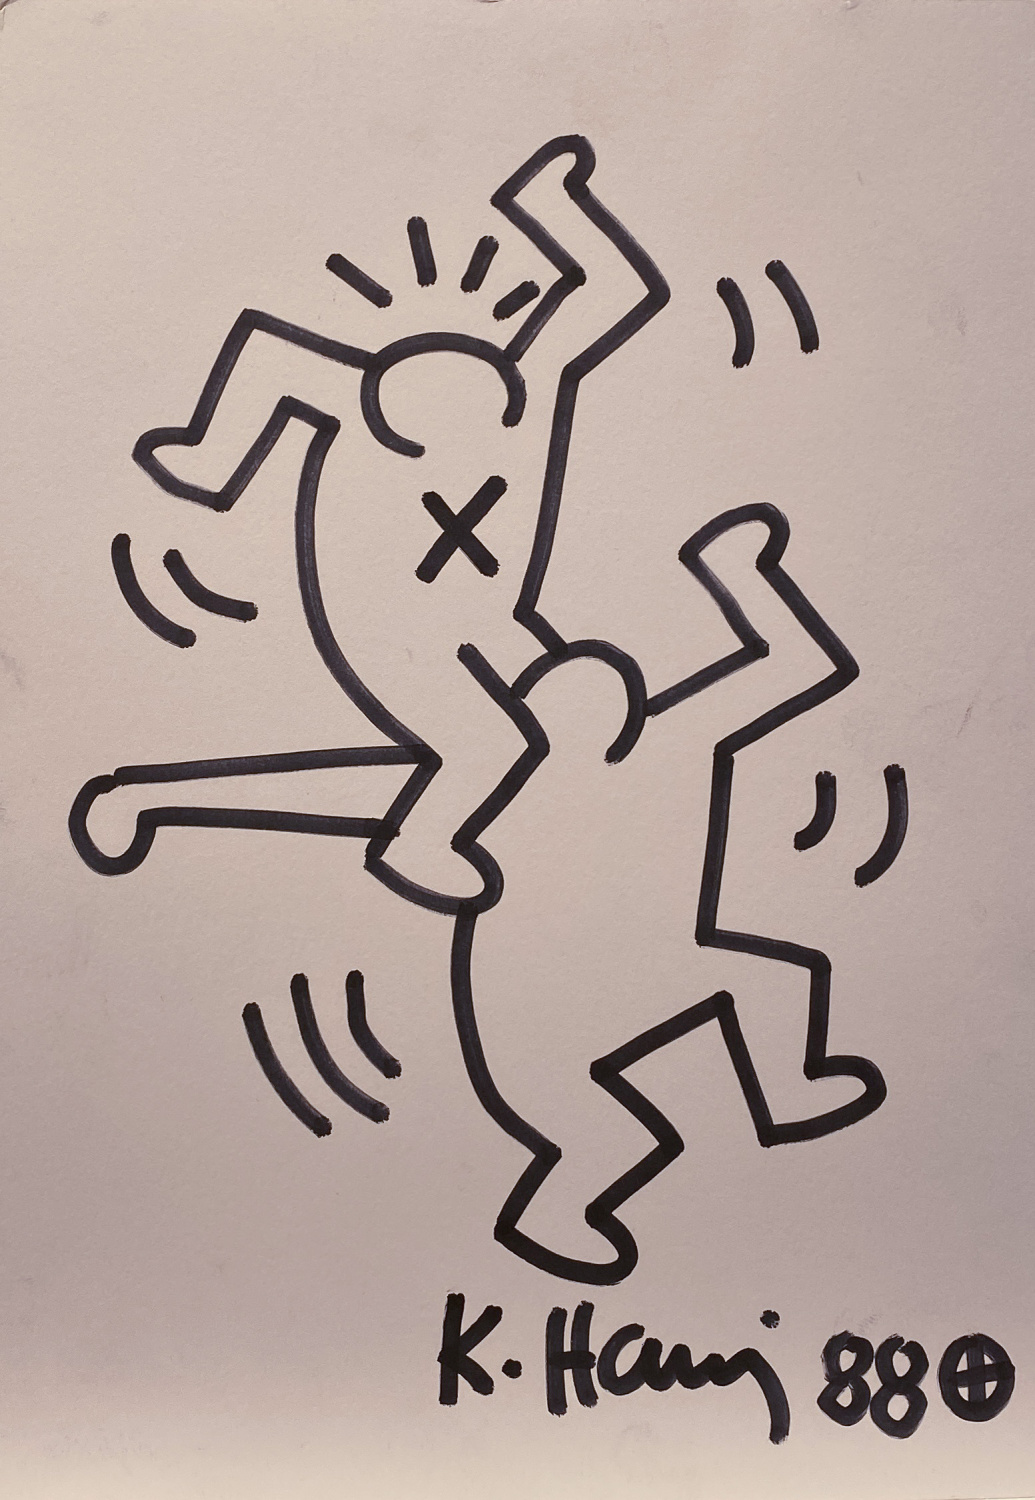 “Battle” by Keith Haring